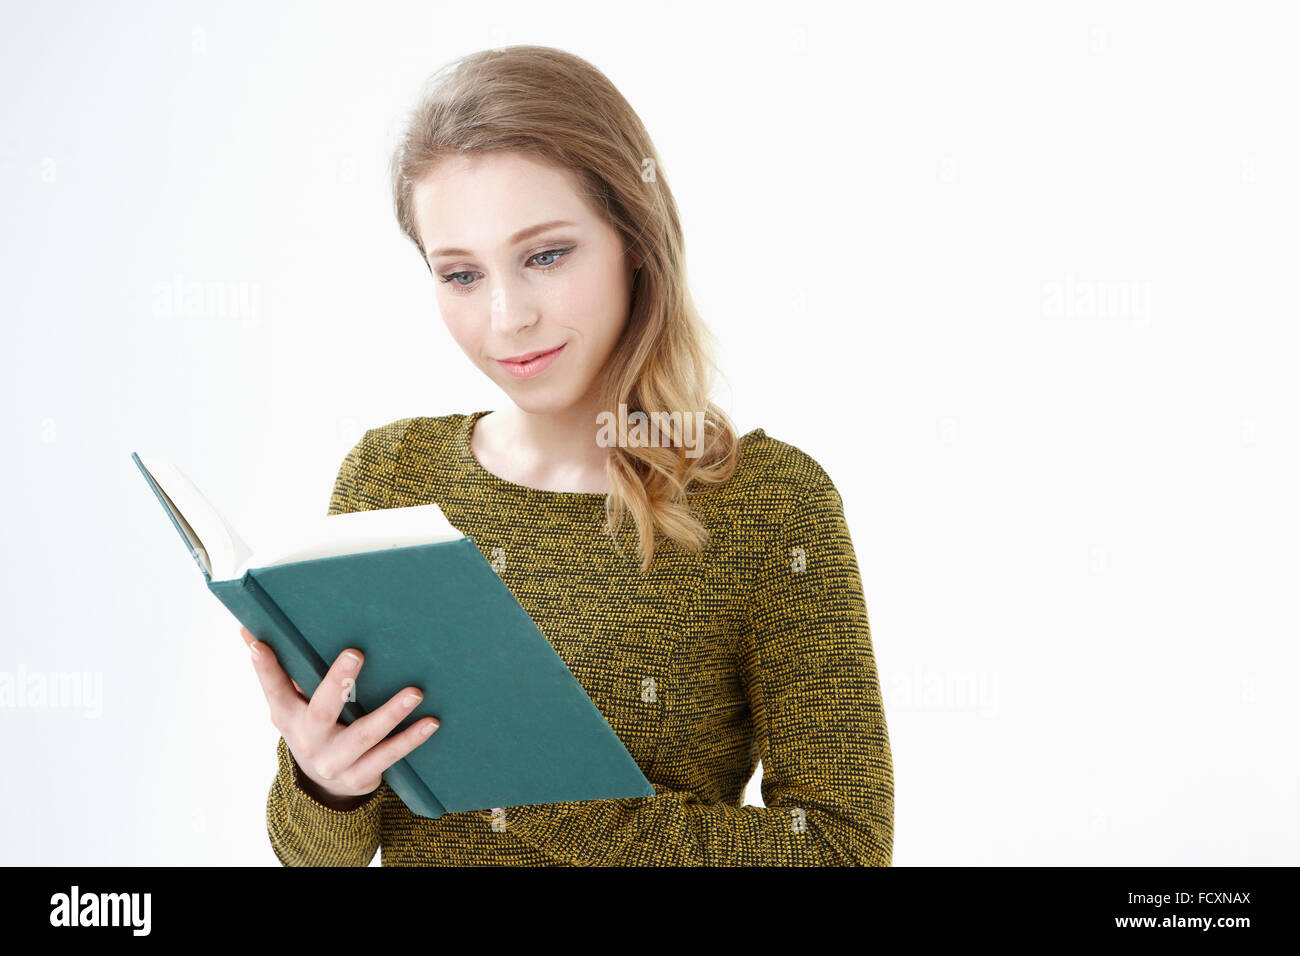 Portrait of young smiling woman reading a book Banque D'Images